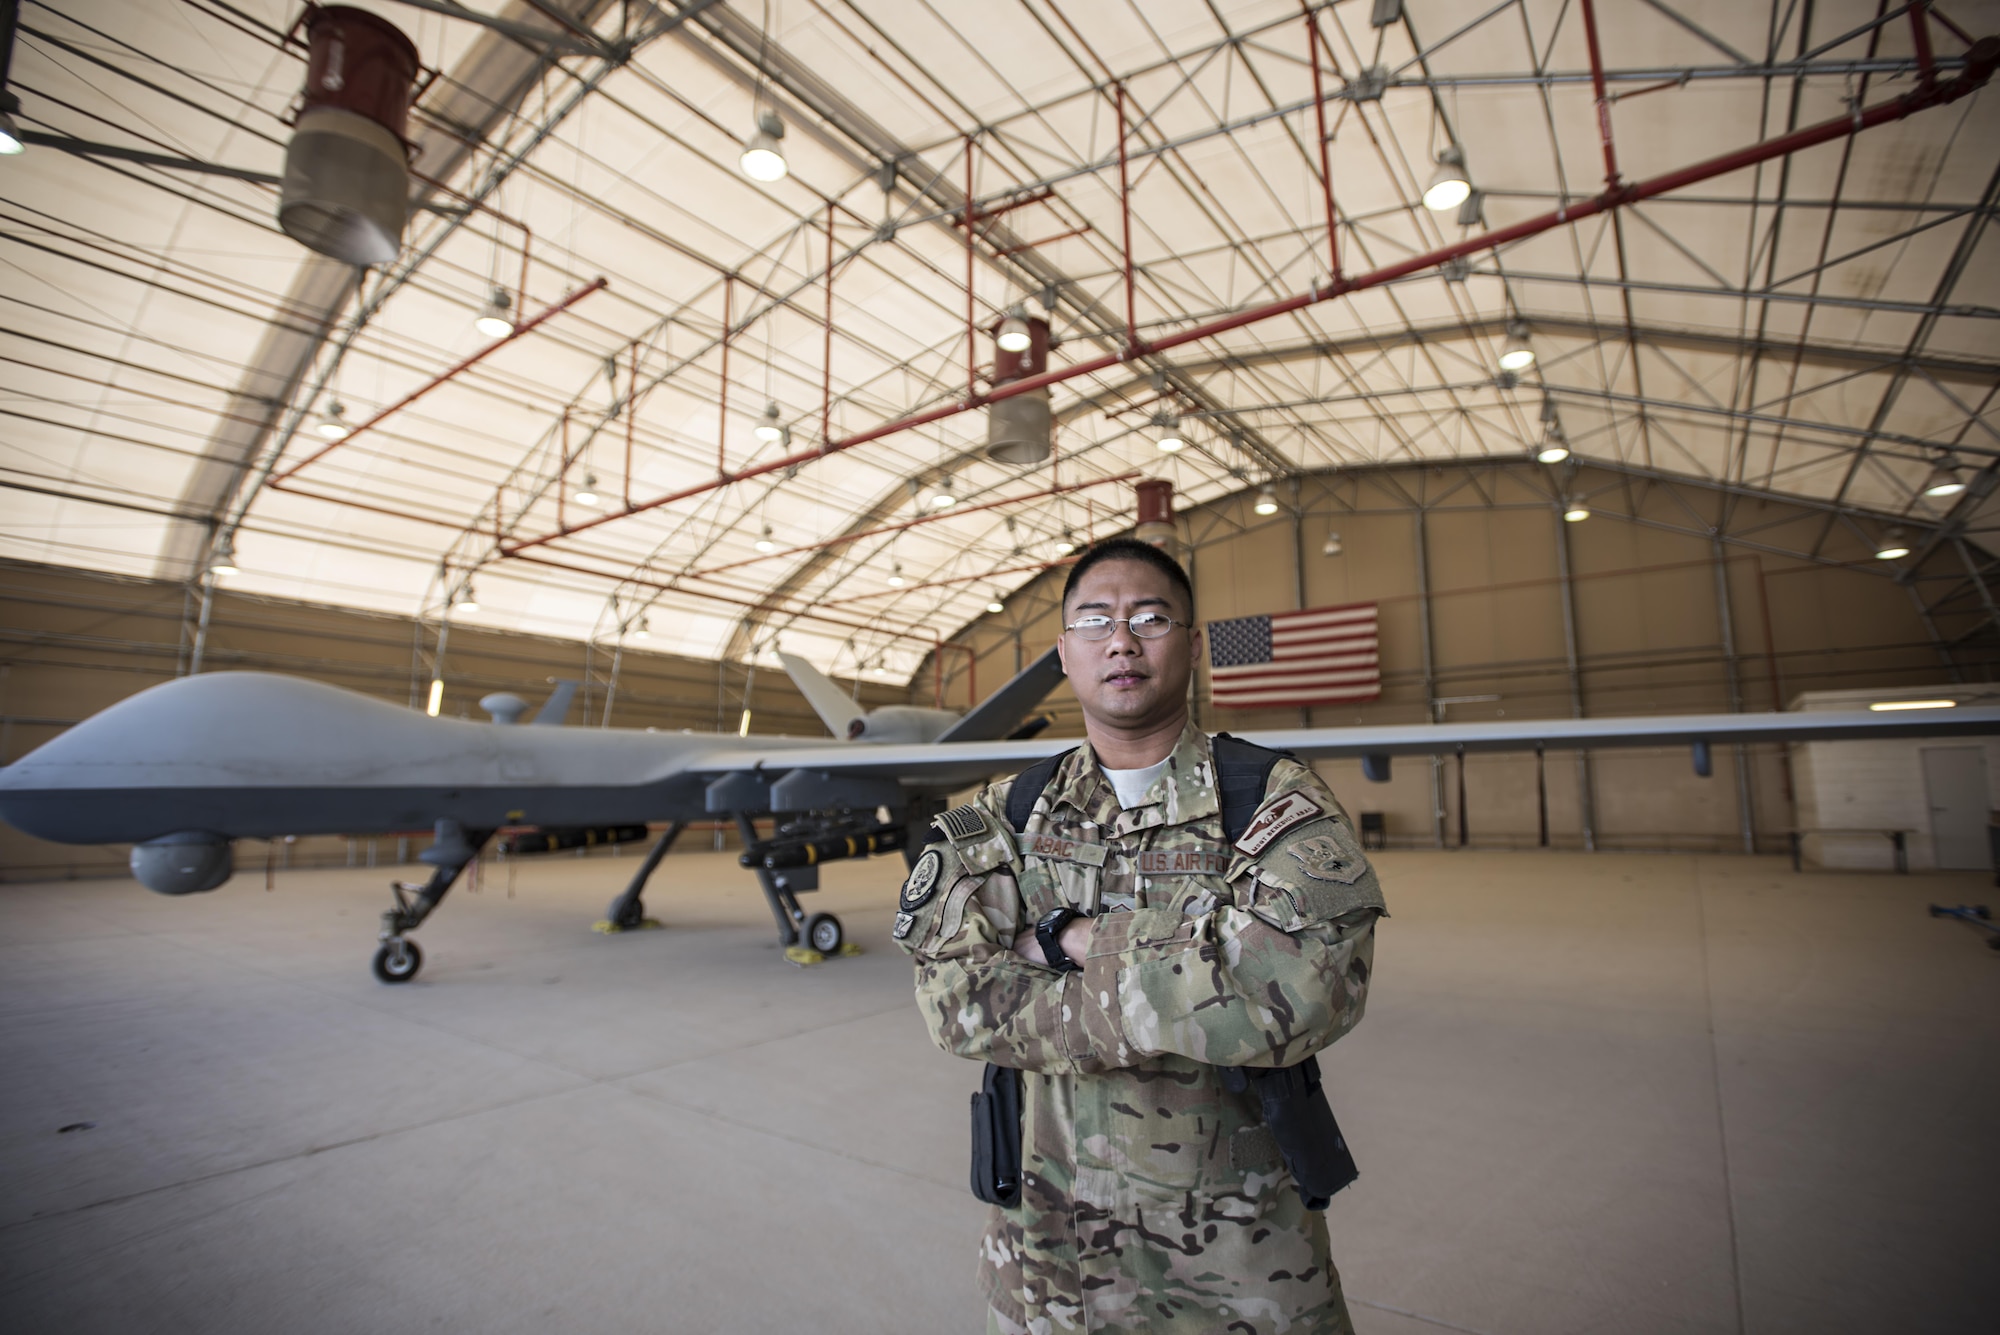 Master Sgt. Ben, 62nd Reconnaissance Squadron sensor operator, poses in front of an MQ-9 Reaper at Kandahar Airfield, Afghanistan Nov. 5, 2016. Ben is a native of the Philippines and became a U.S. citizen while serving in the U.S. Air Force. (U.S. Air Force photo by Staff Sgt. Katherine Spessa) 